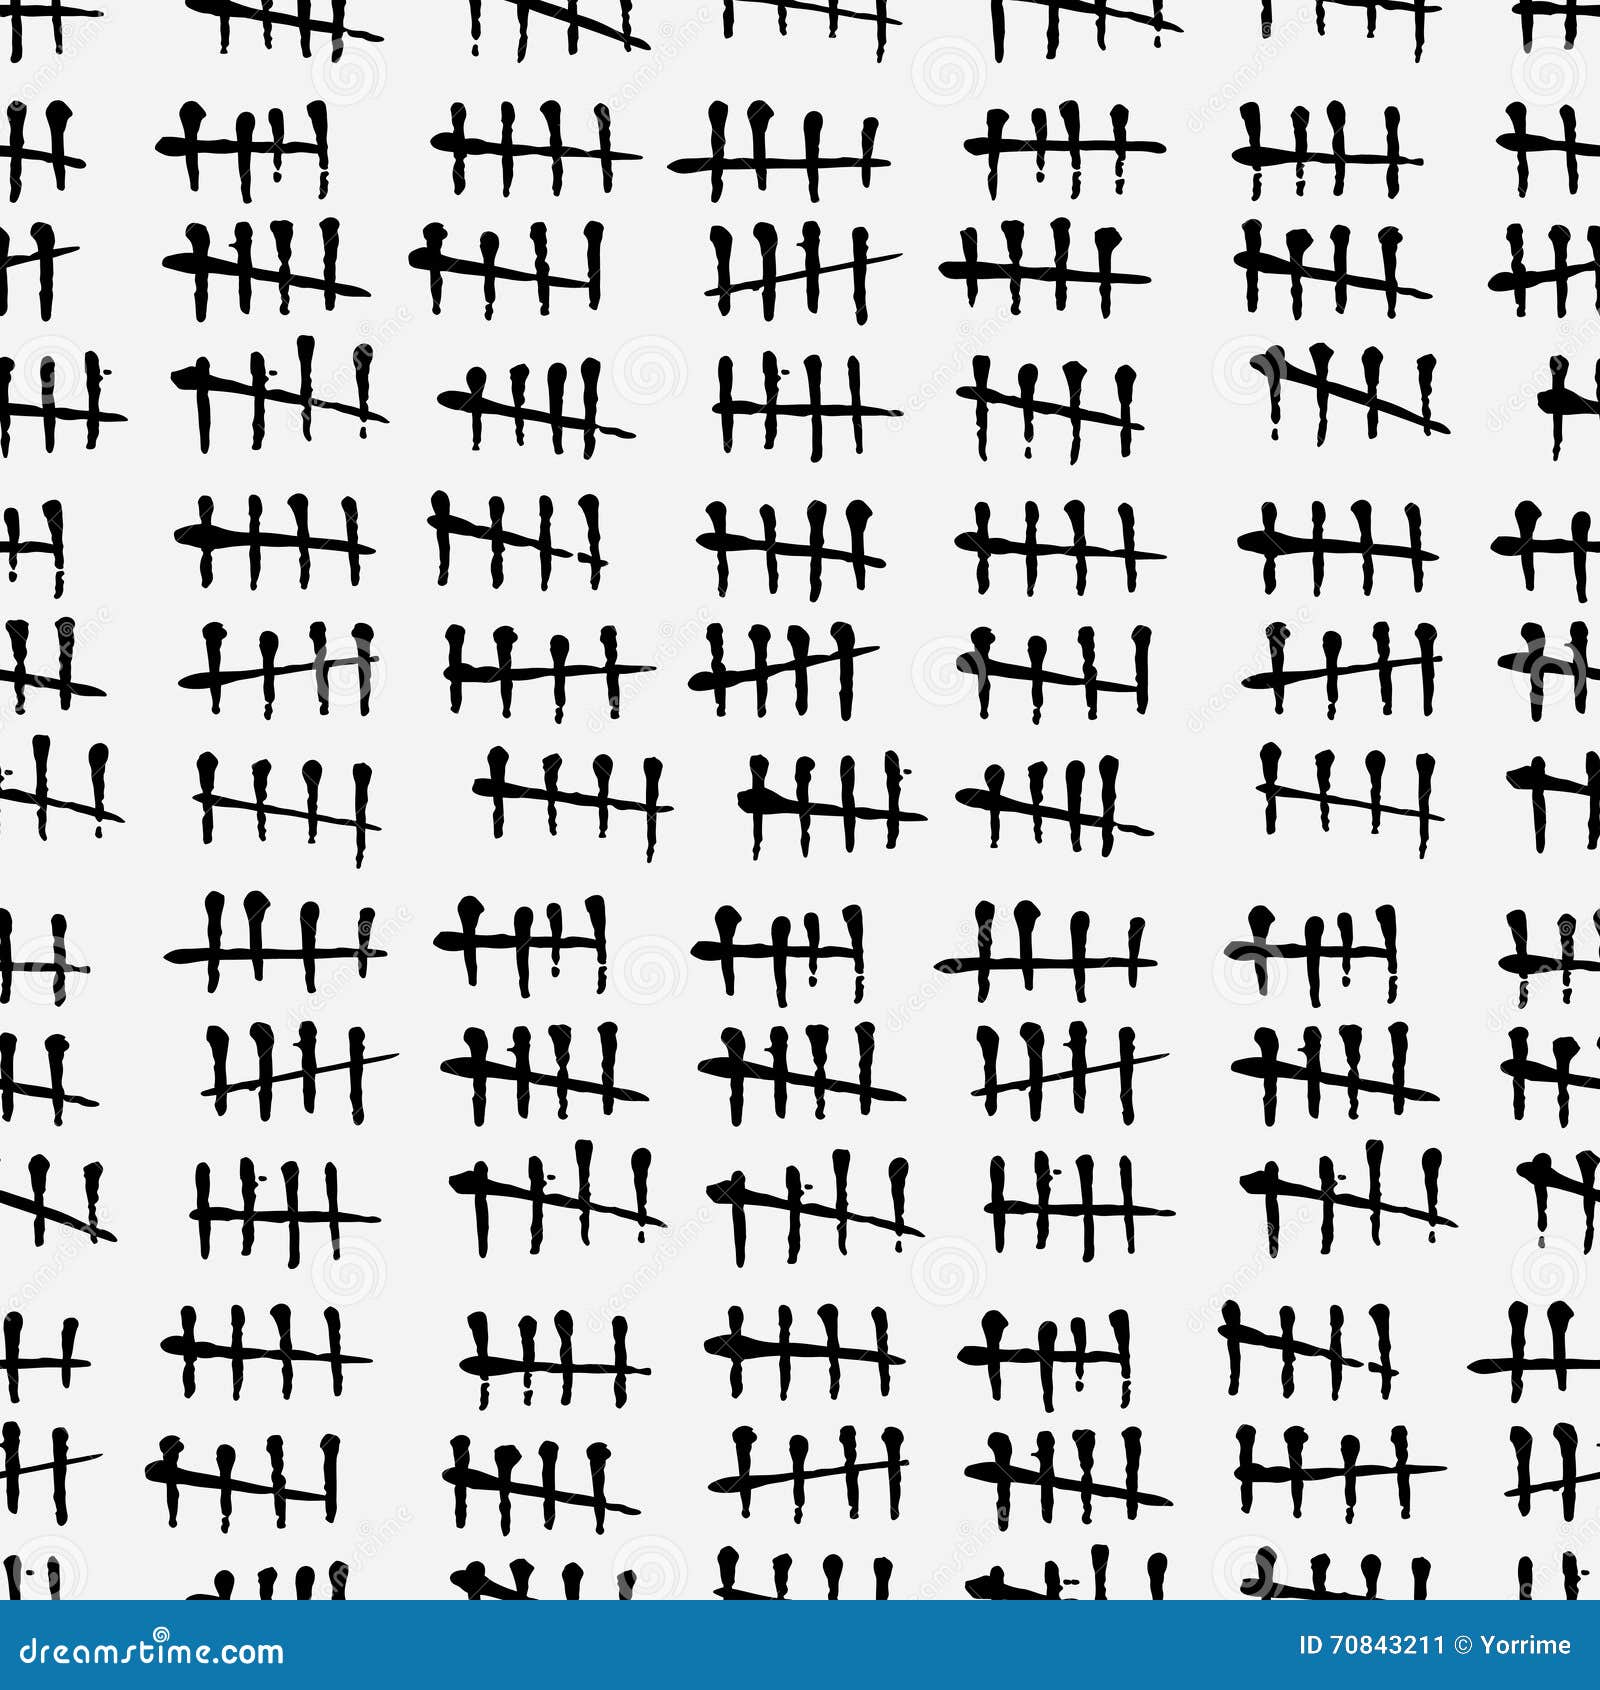 Tally Marks Of Various Styles, A Set Of Prison Wall Day Marks Vector